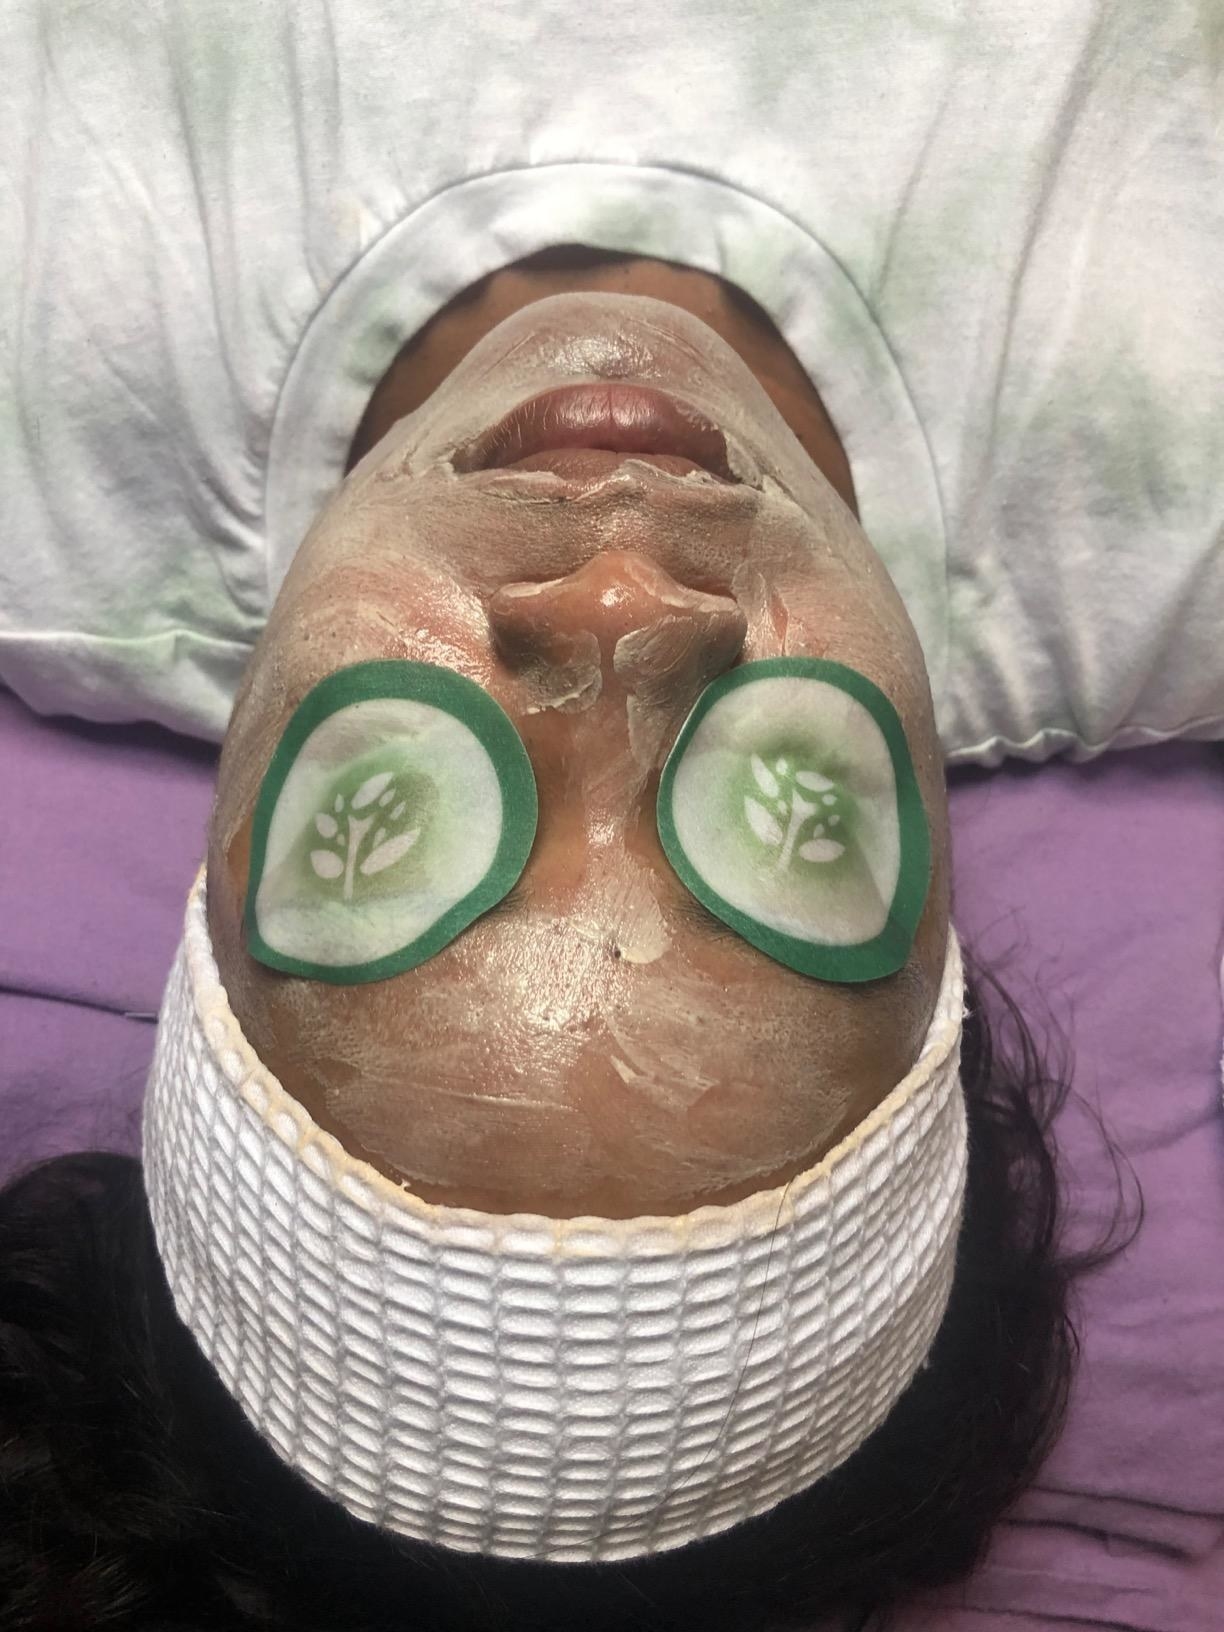 Reviewer getting a facial with cucumber pads on their eyes